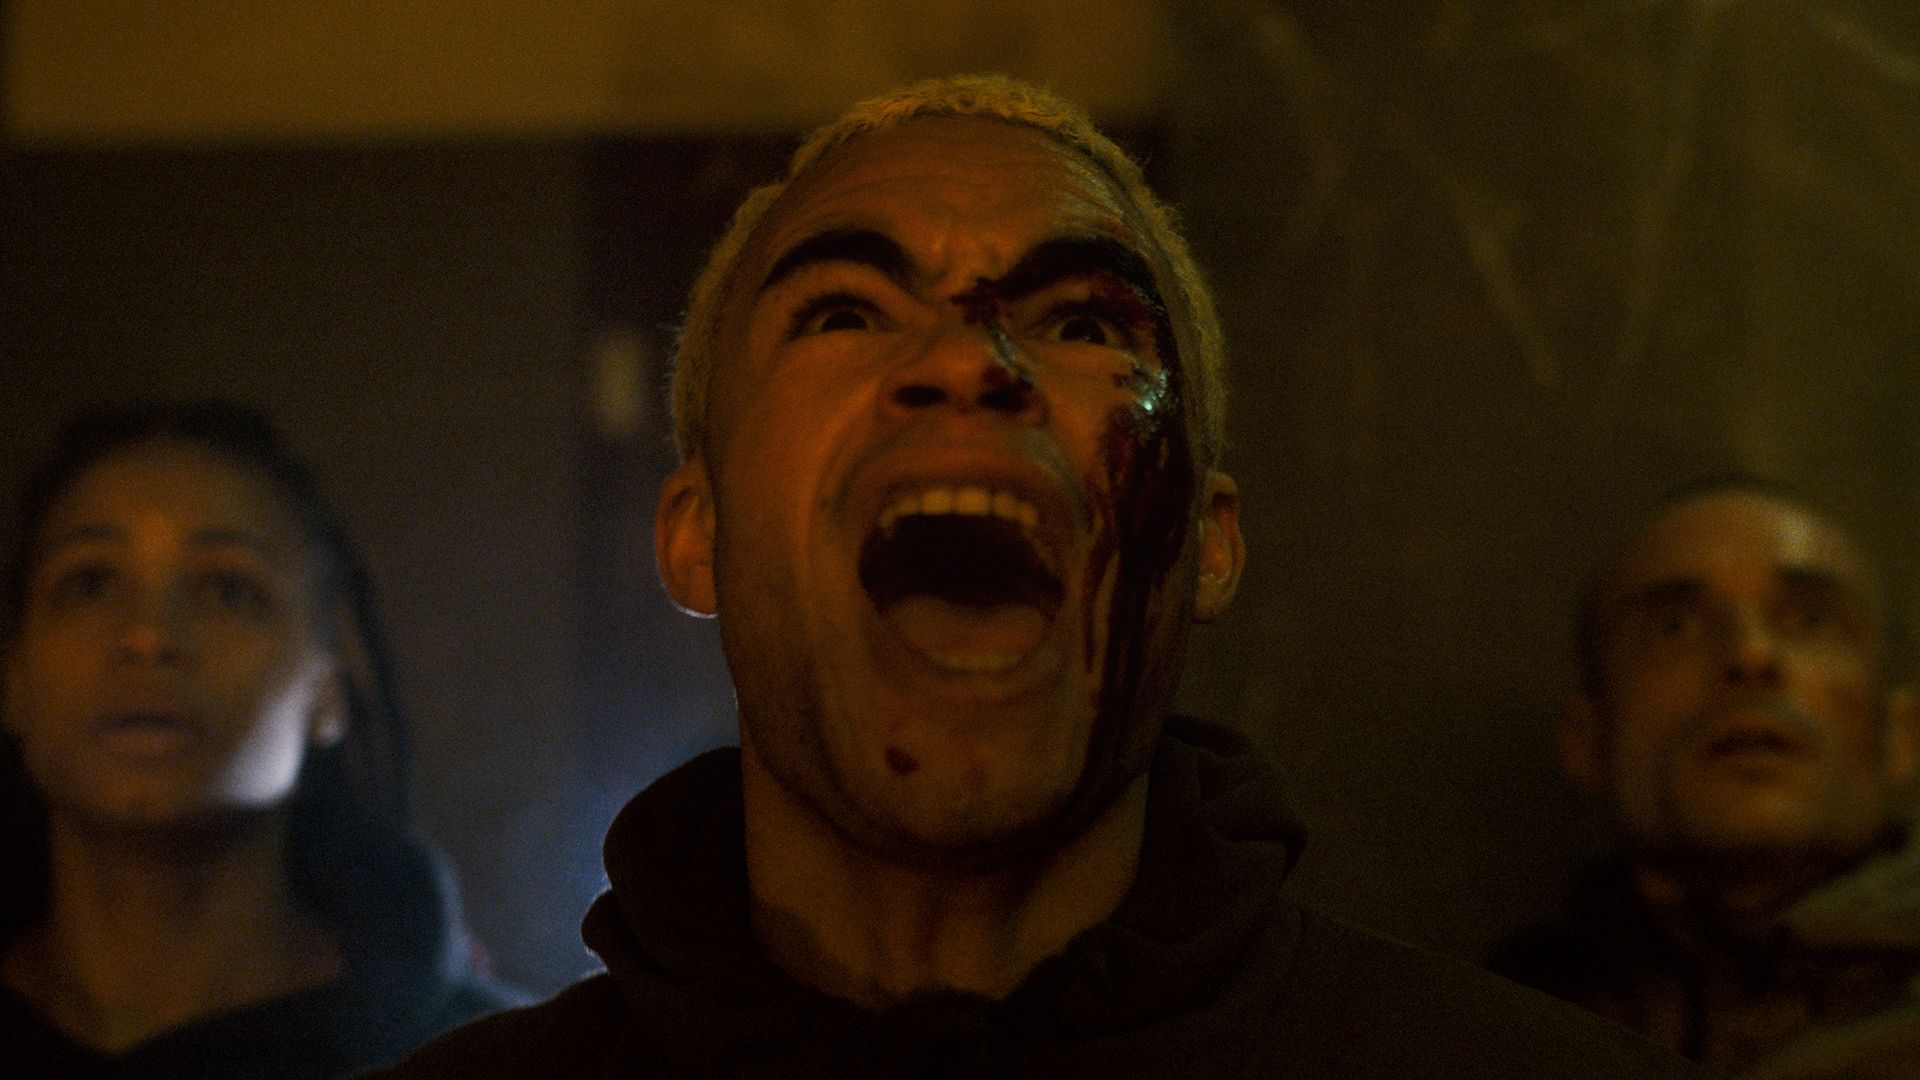 A close-up of Theo Christine as Kaleb in Infested, screaming in fear at something off-screen